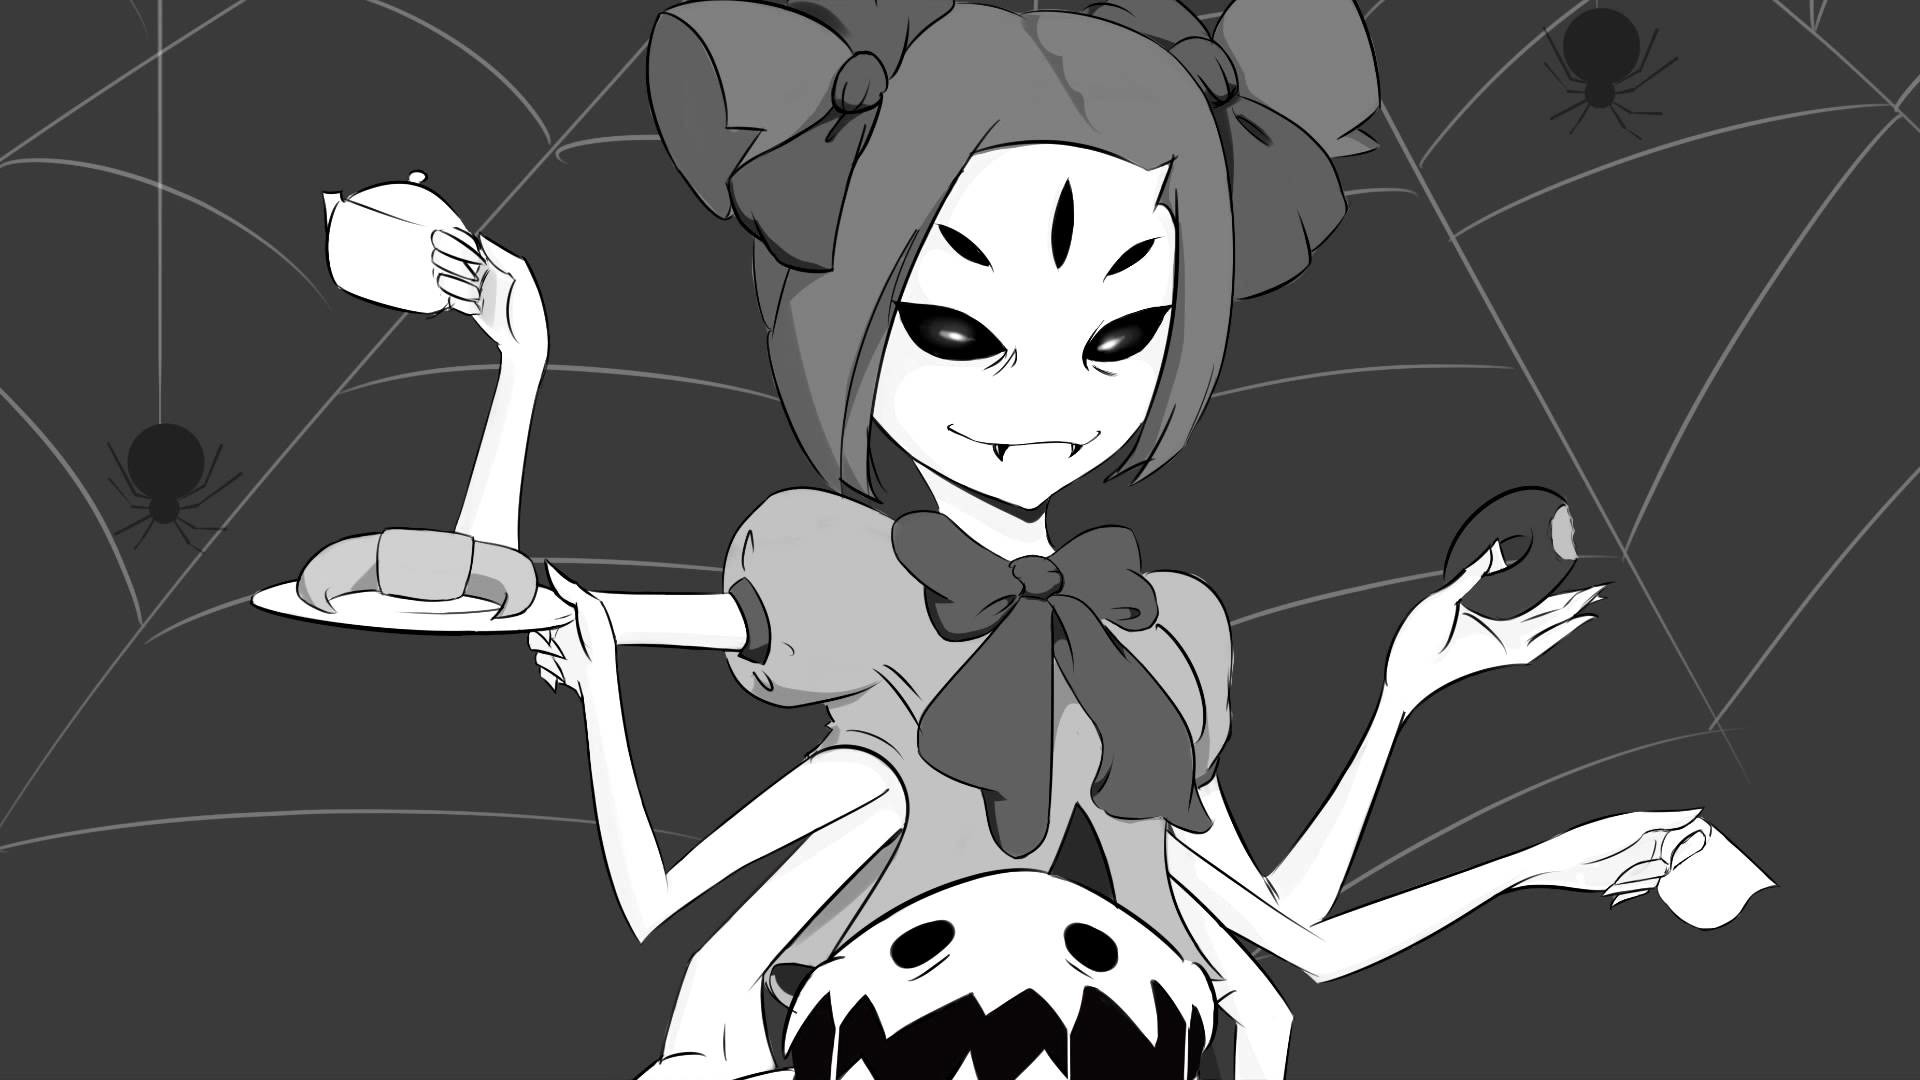 17 Best images about Muffet on Pinterest Games today, The games